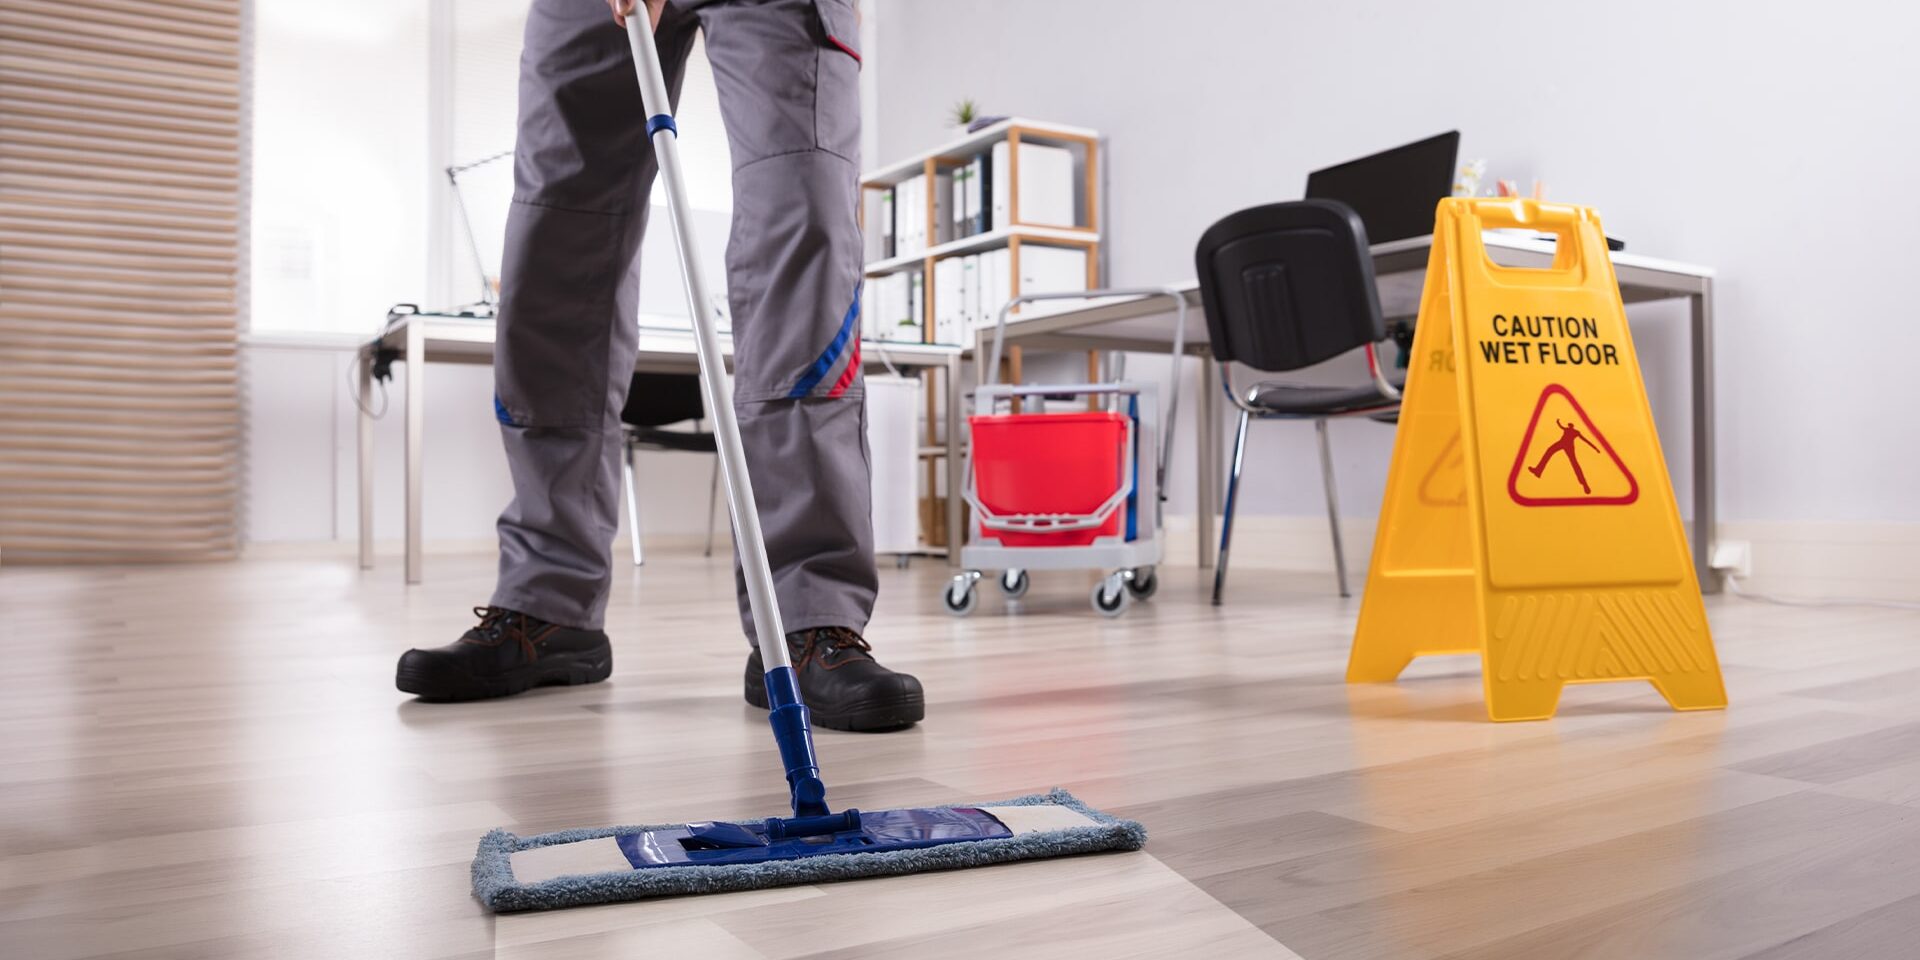 OCD Cleaners,House cleaning San Antonio,House Cleaning Services San Antonio,House cleaning San Antonio,house cleaning services San Antonio,house cleaning services in San Antonio